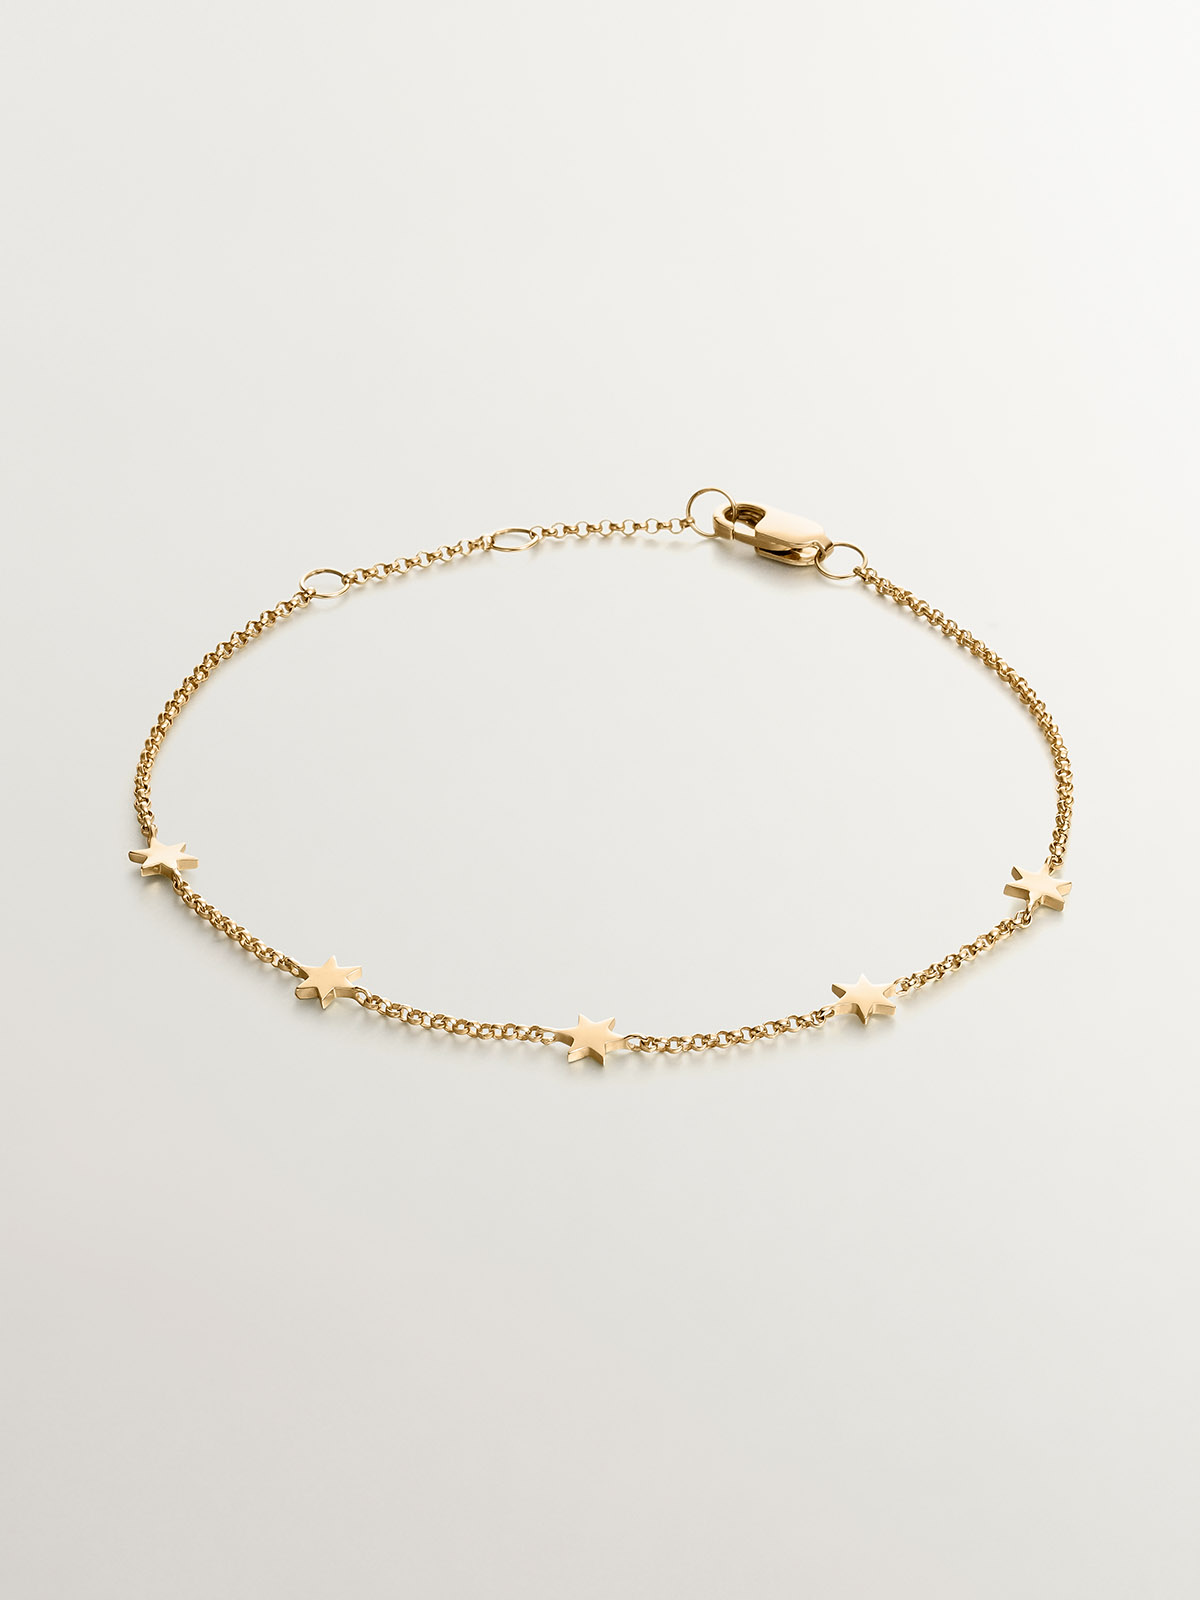 925 Silver bracelet bathed in 18K yellow gold with stars.